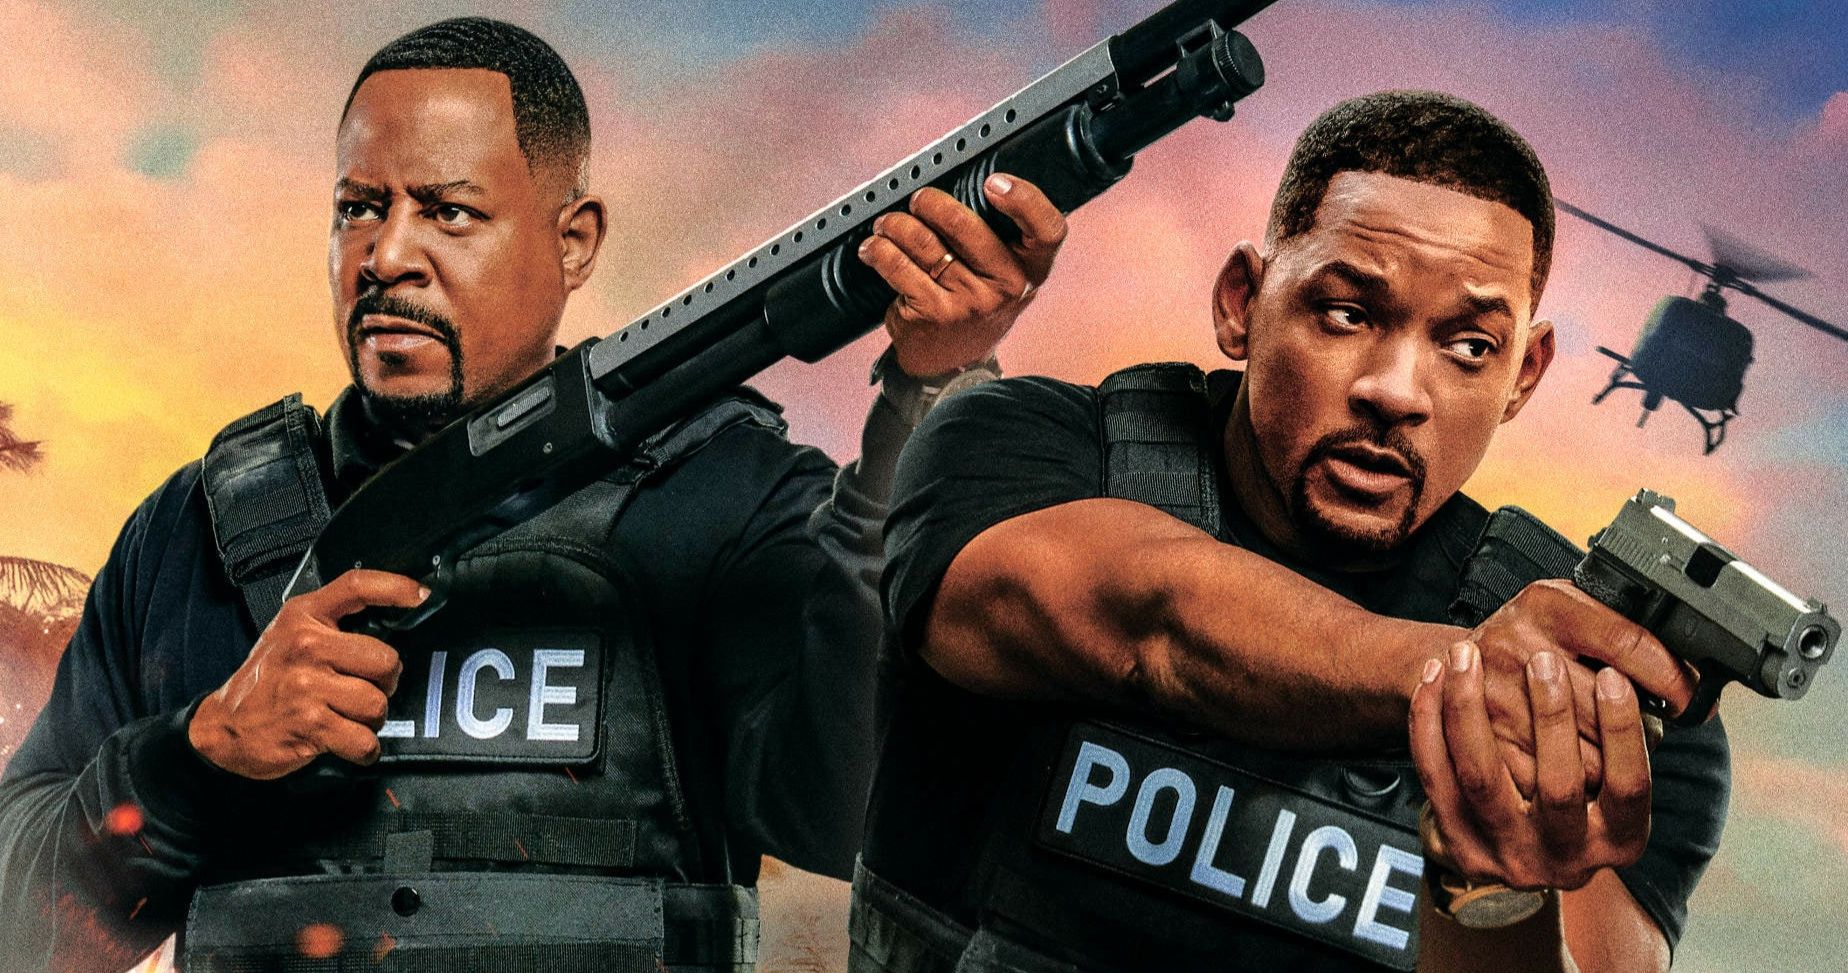 Bad Boys for Life Gets Early Digital Release This Month